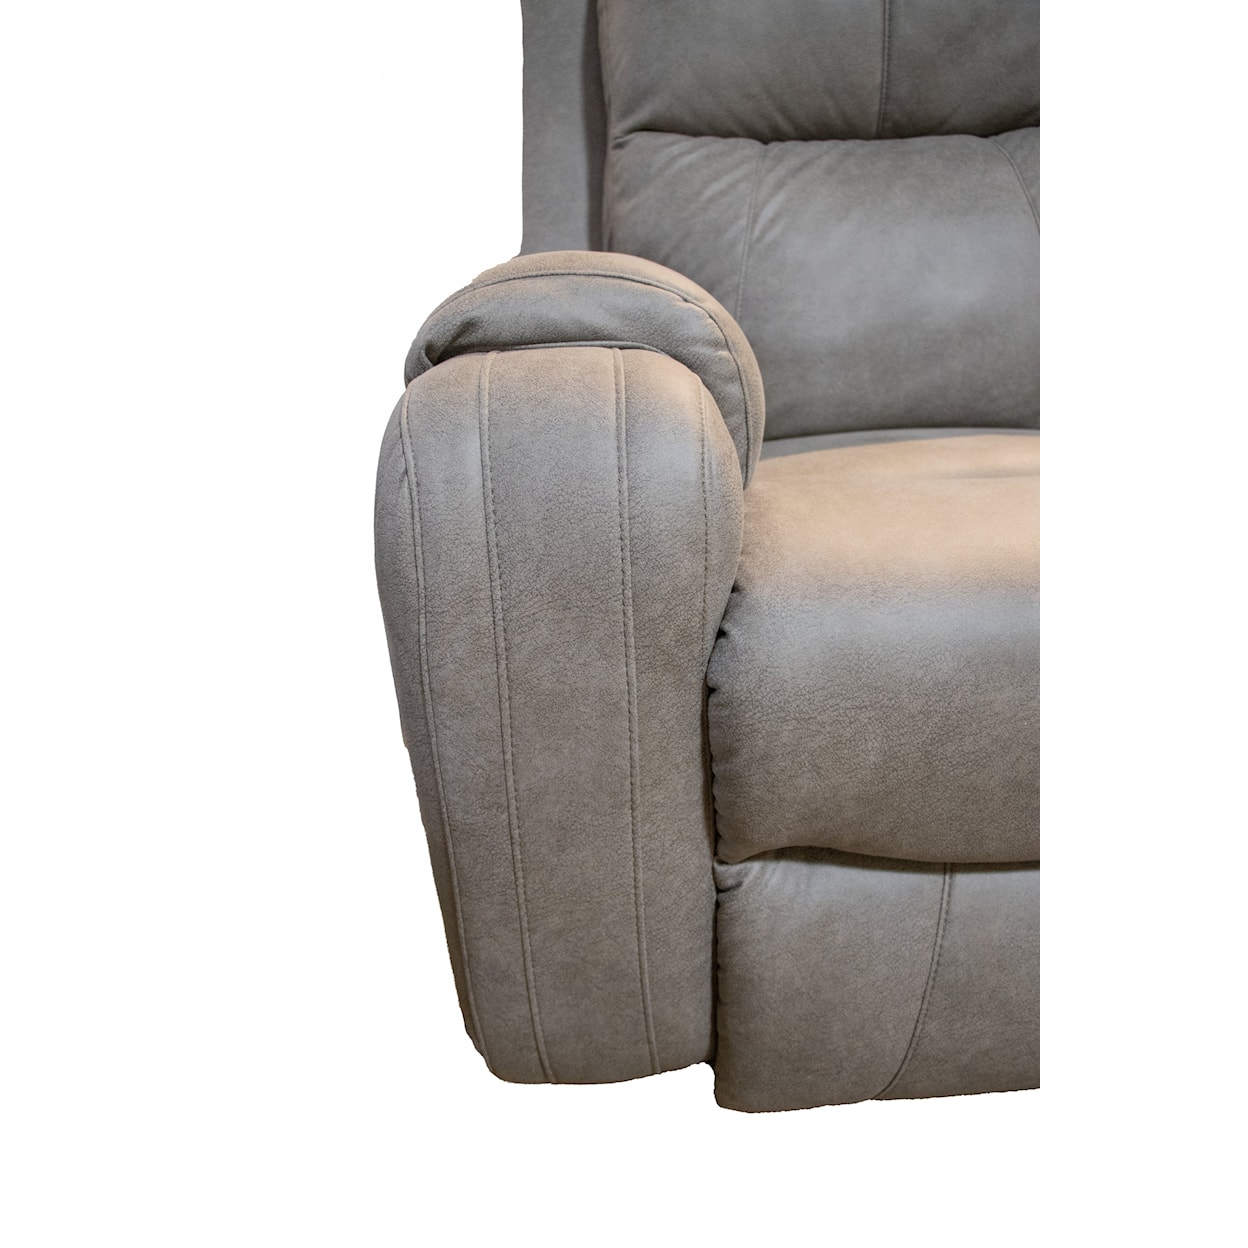 Southern Motion Contour Power Headrest Double Reclining Sofa